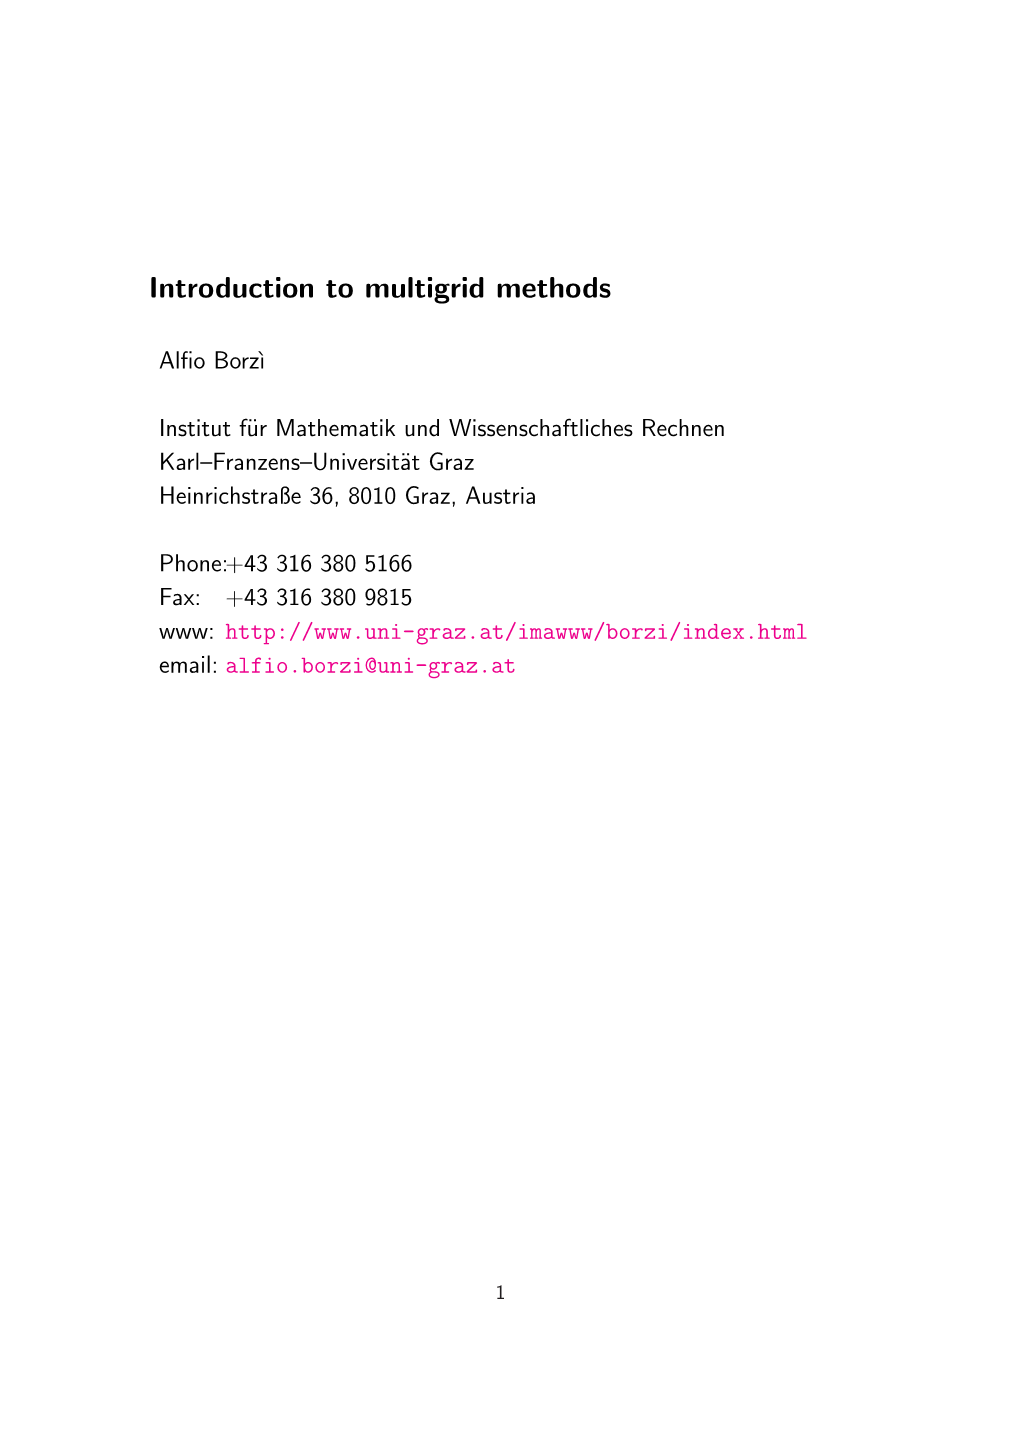 Introduction to Multigrid Methods